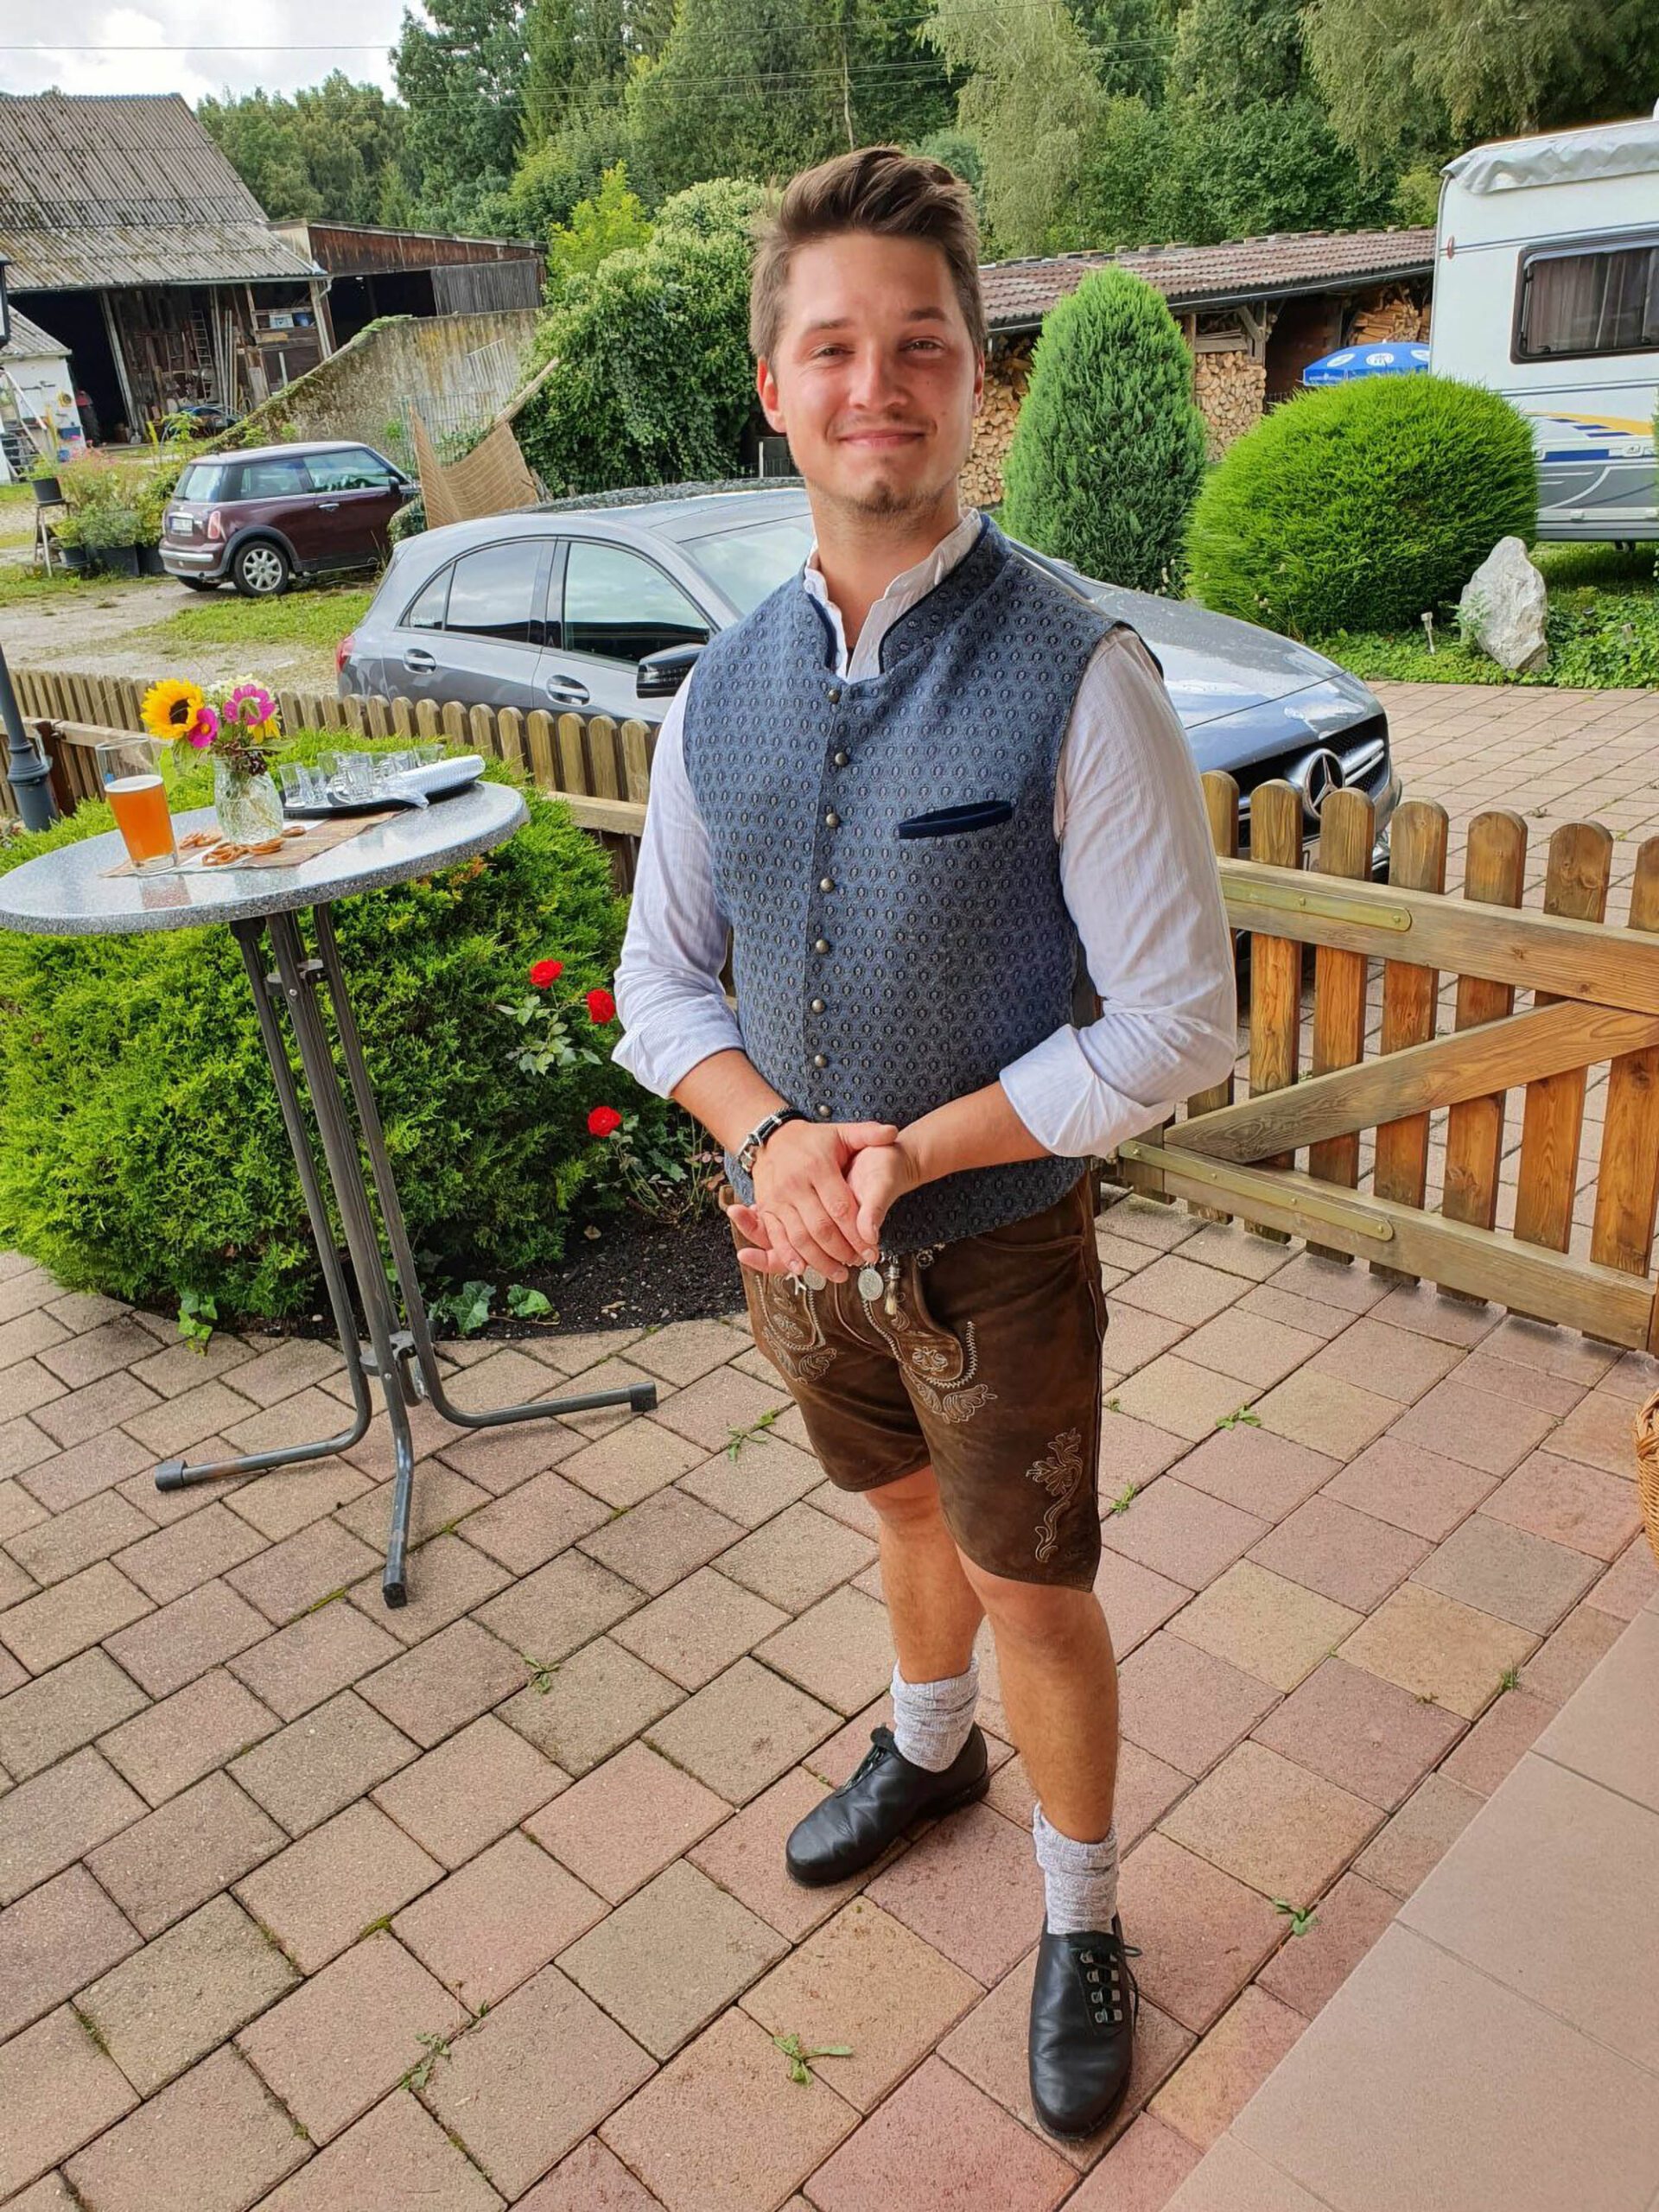 Tobias Dreiseitel, 25, poses in undated picture. He disappeared from a festival in Bavaria on Friday, Aug. 5th, 2022. (Bayerische Polizei/Zenger)